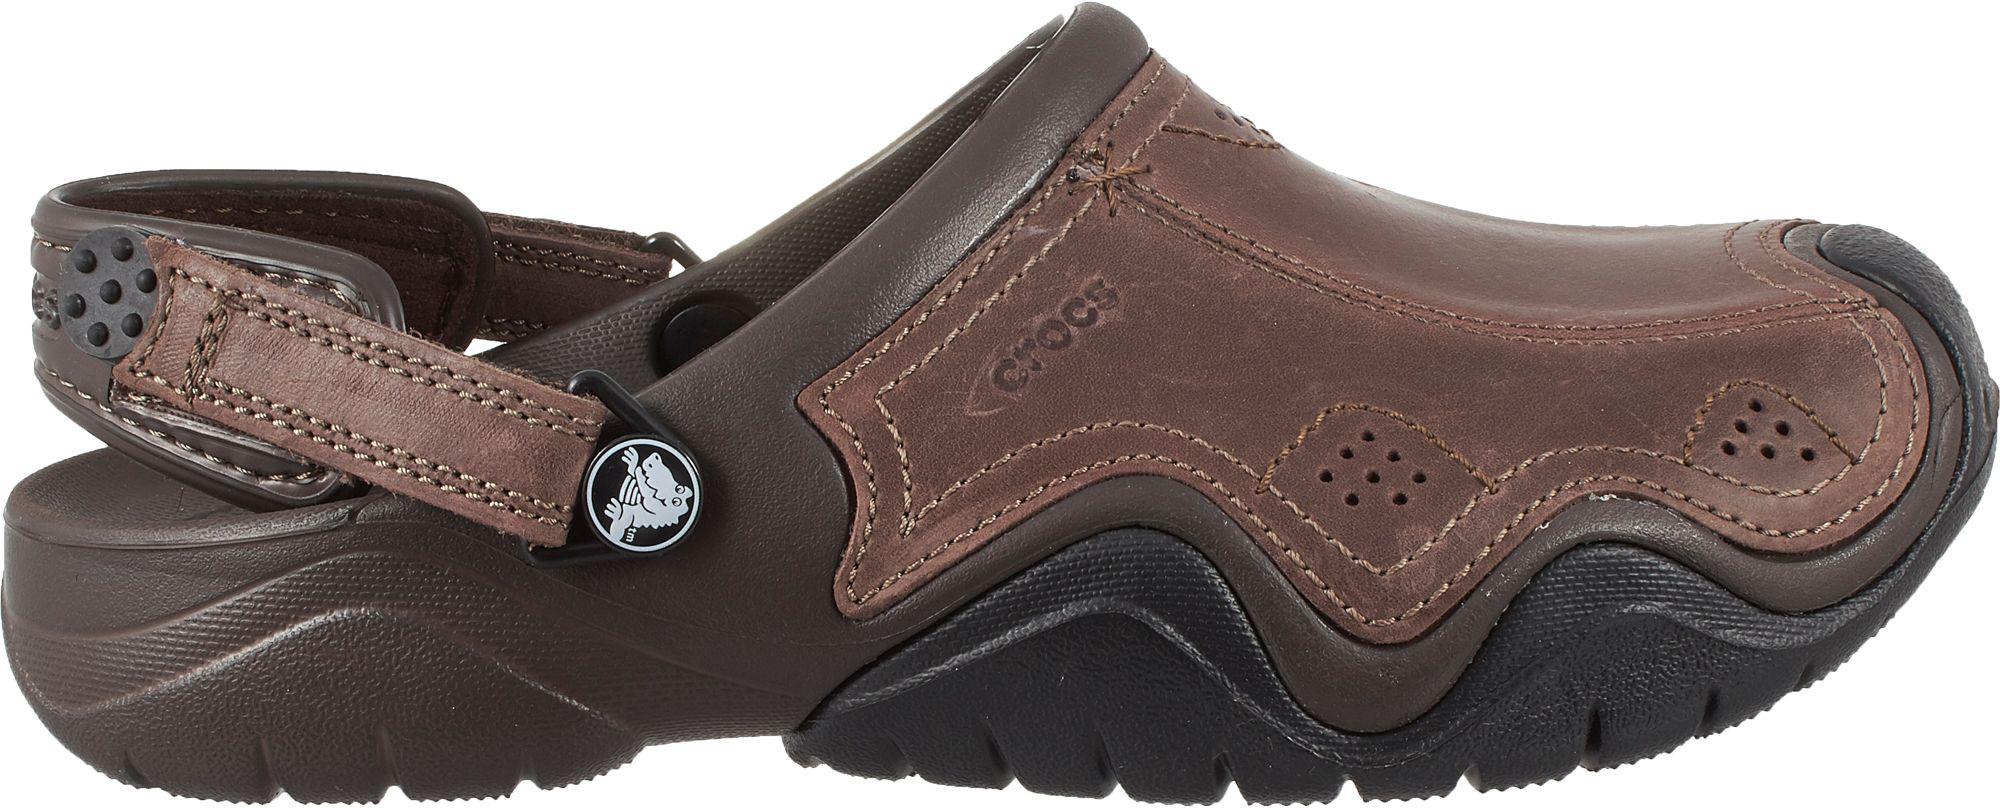 crocs swiftwater leather clog